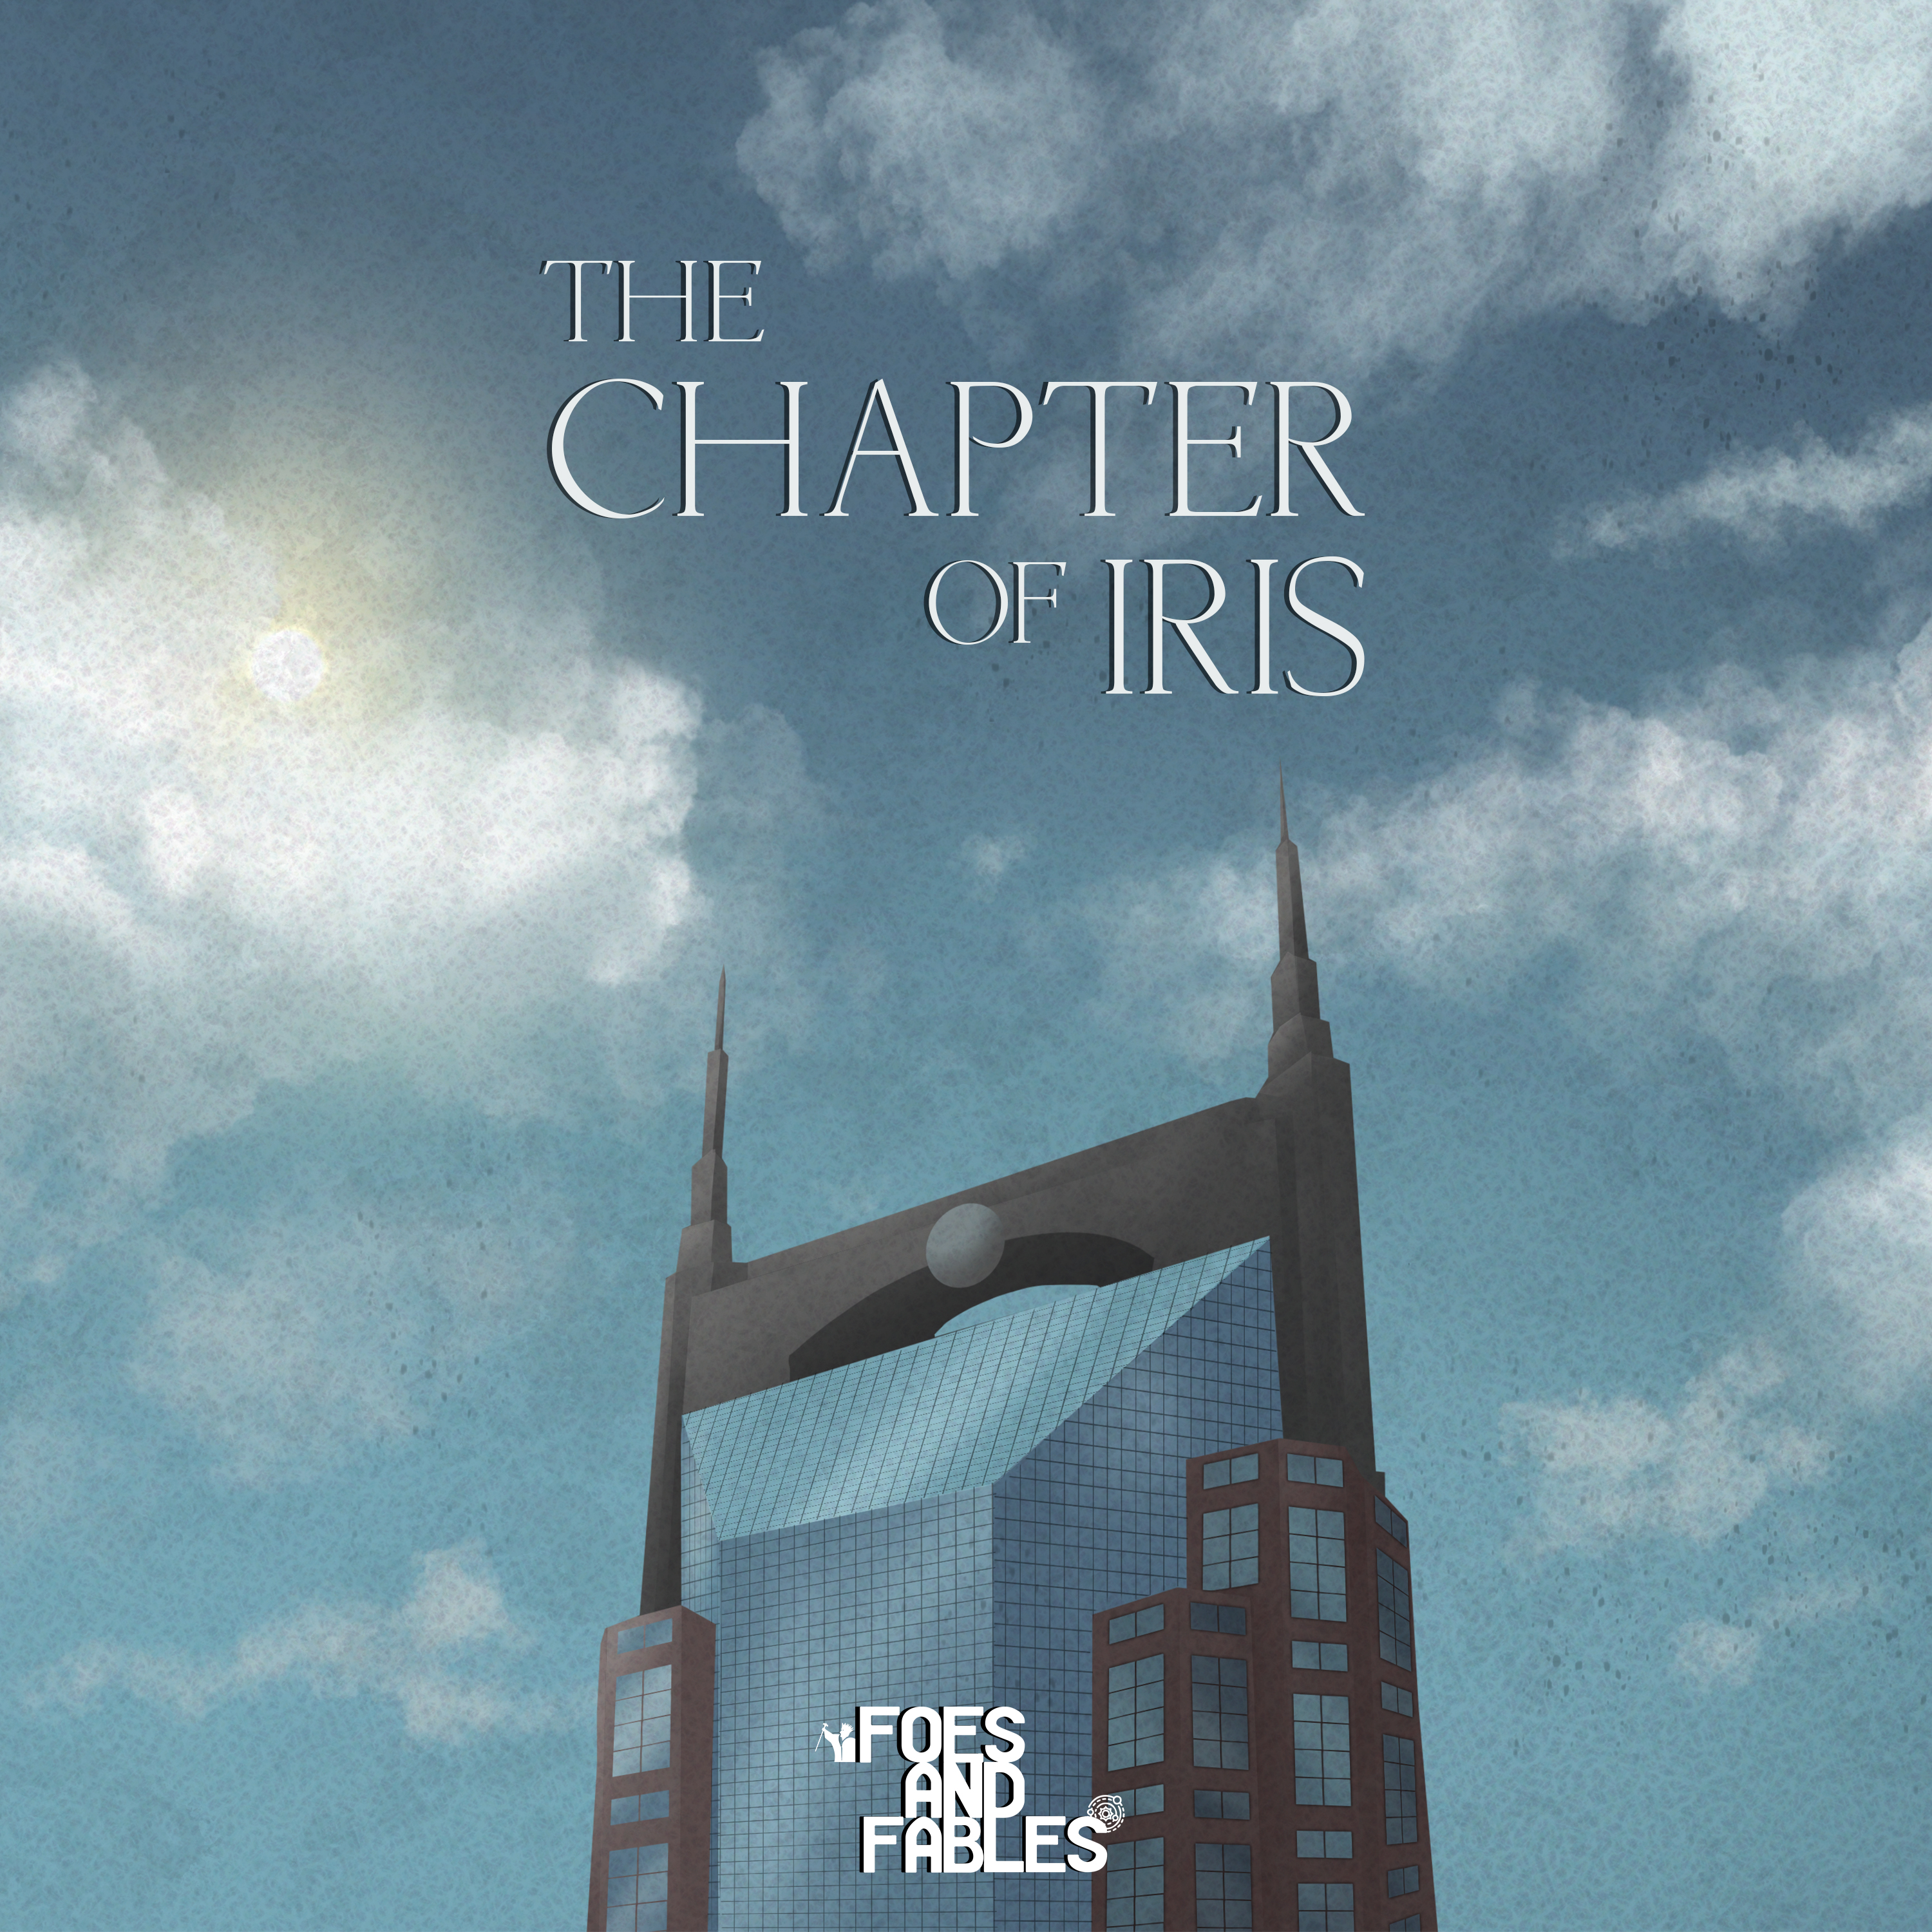 21. The Boy | The Chapter of Iris